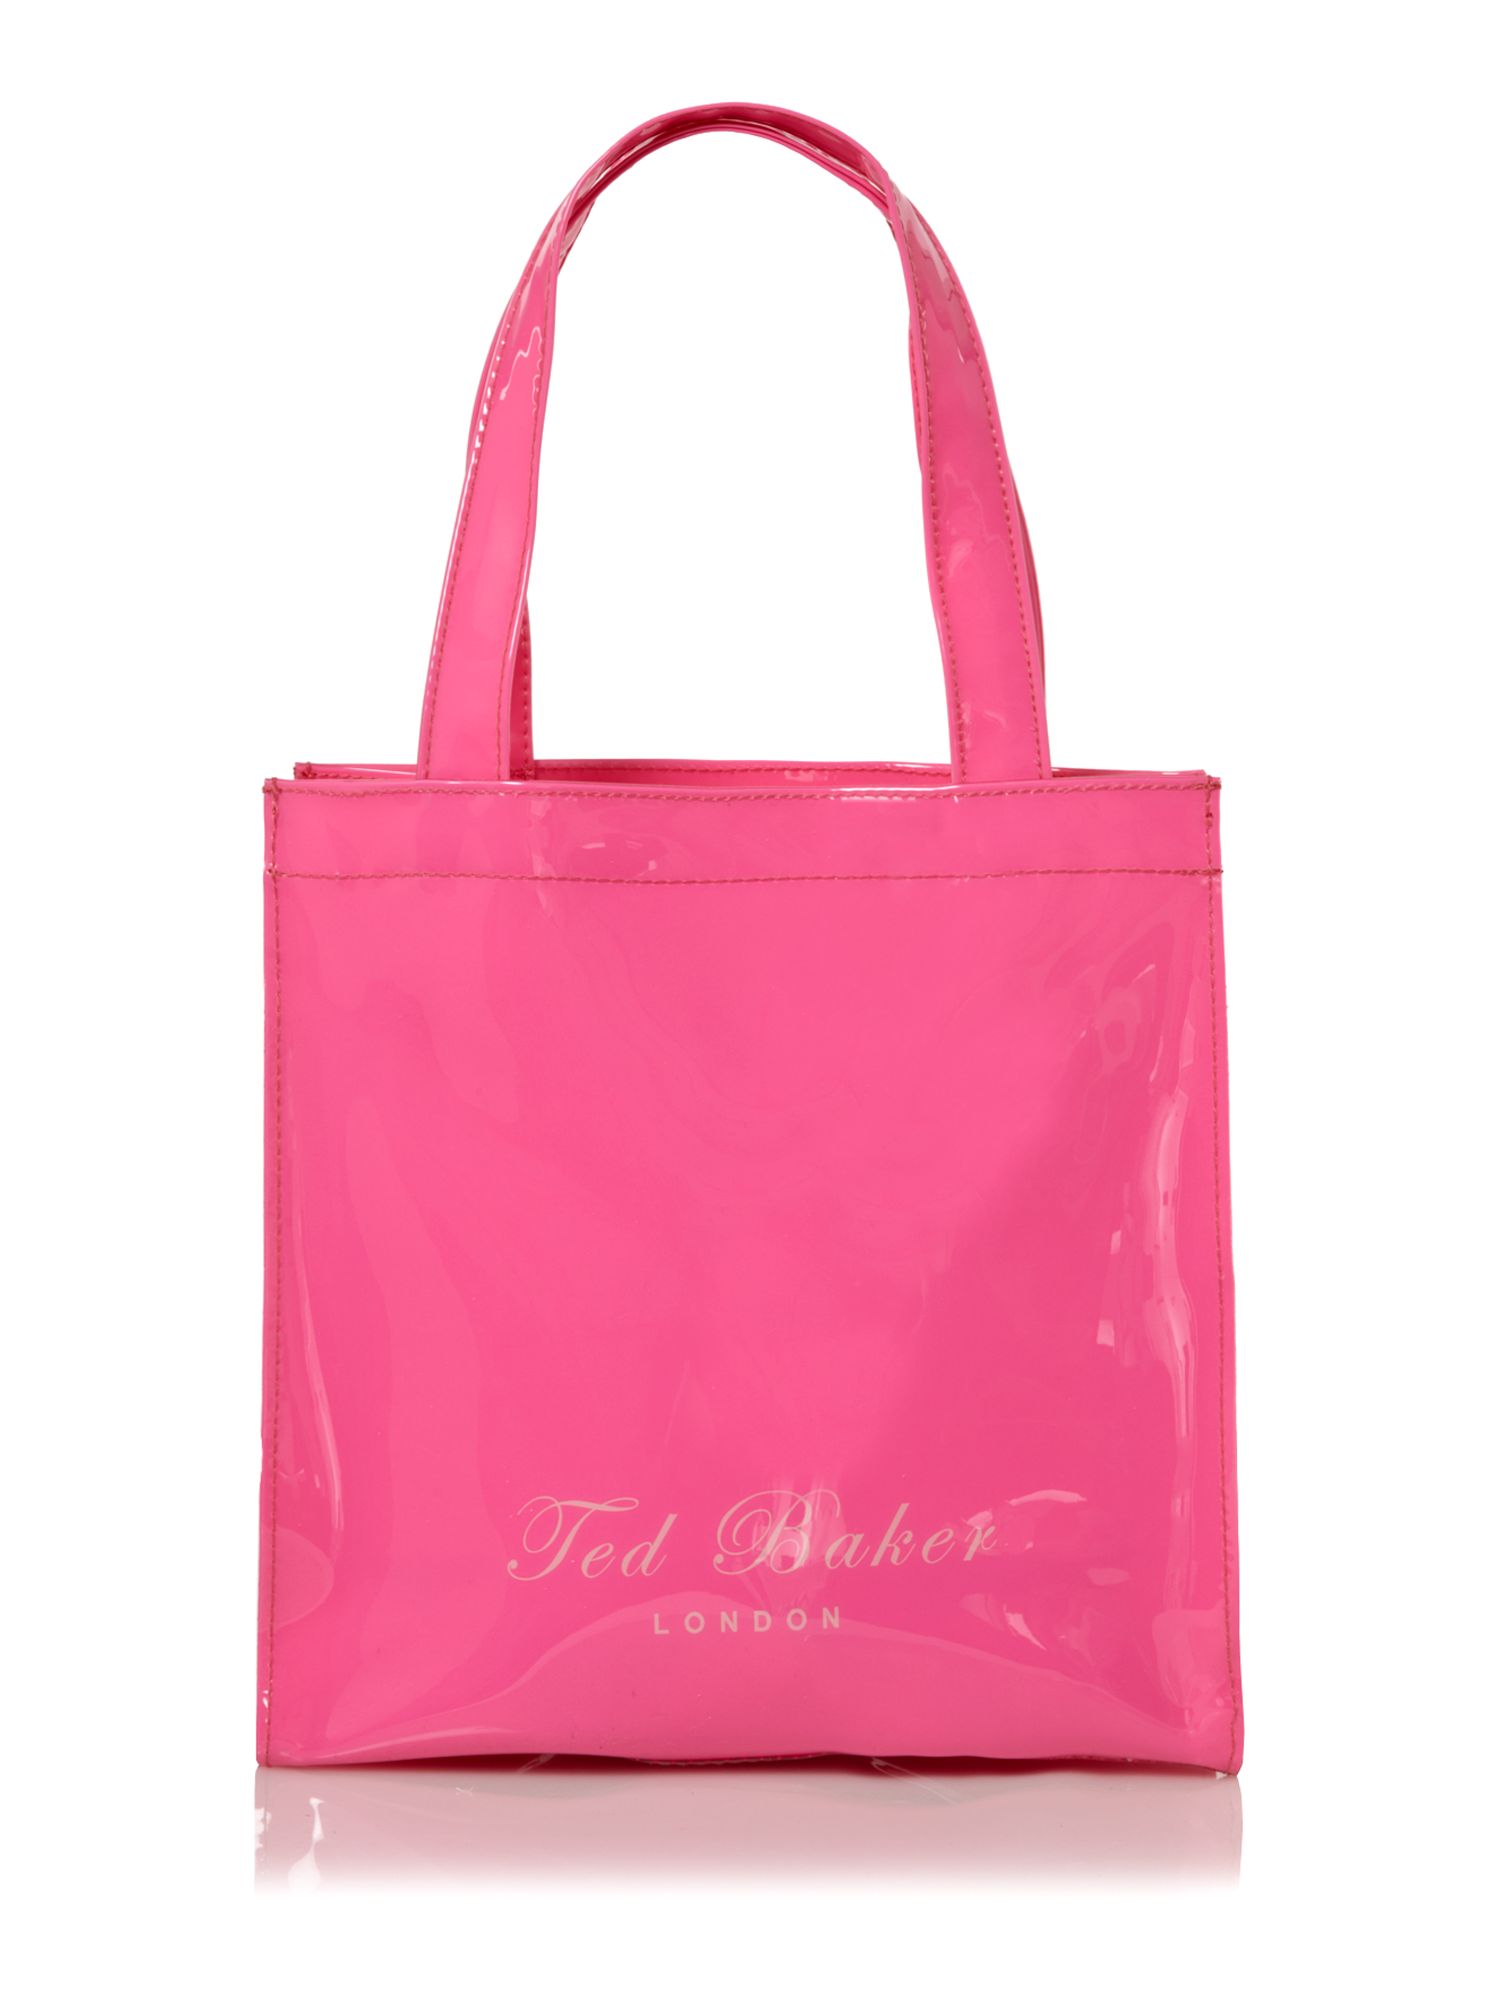 Ted baker Bowcon Small Stud Tote Bag in Pink | Lyst